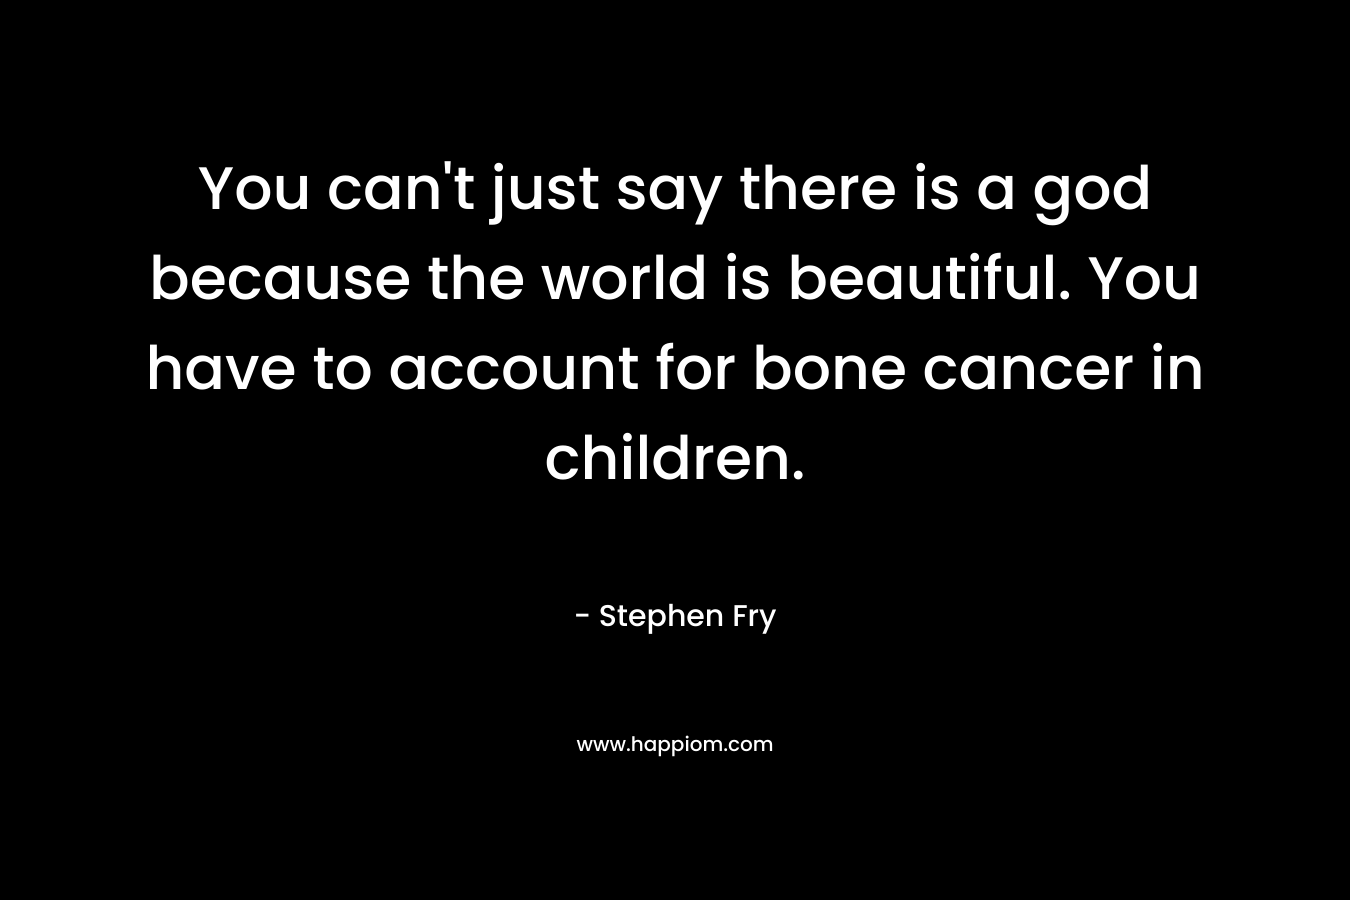 You can’t just say there is a god because the world is beautiful. You have to account for bone cancer in children. – Stephen Fry